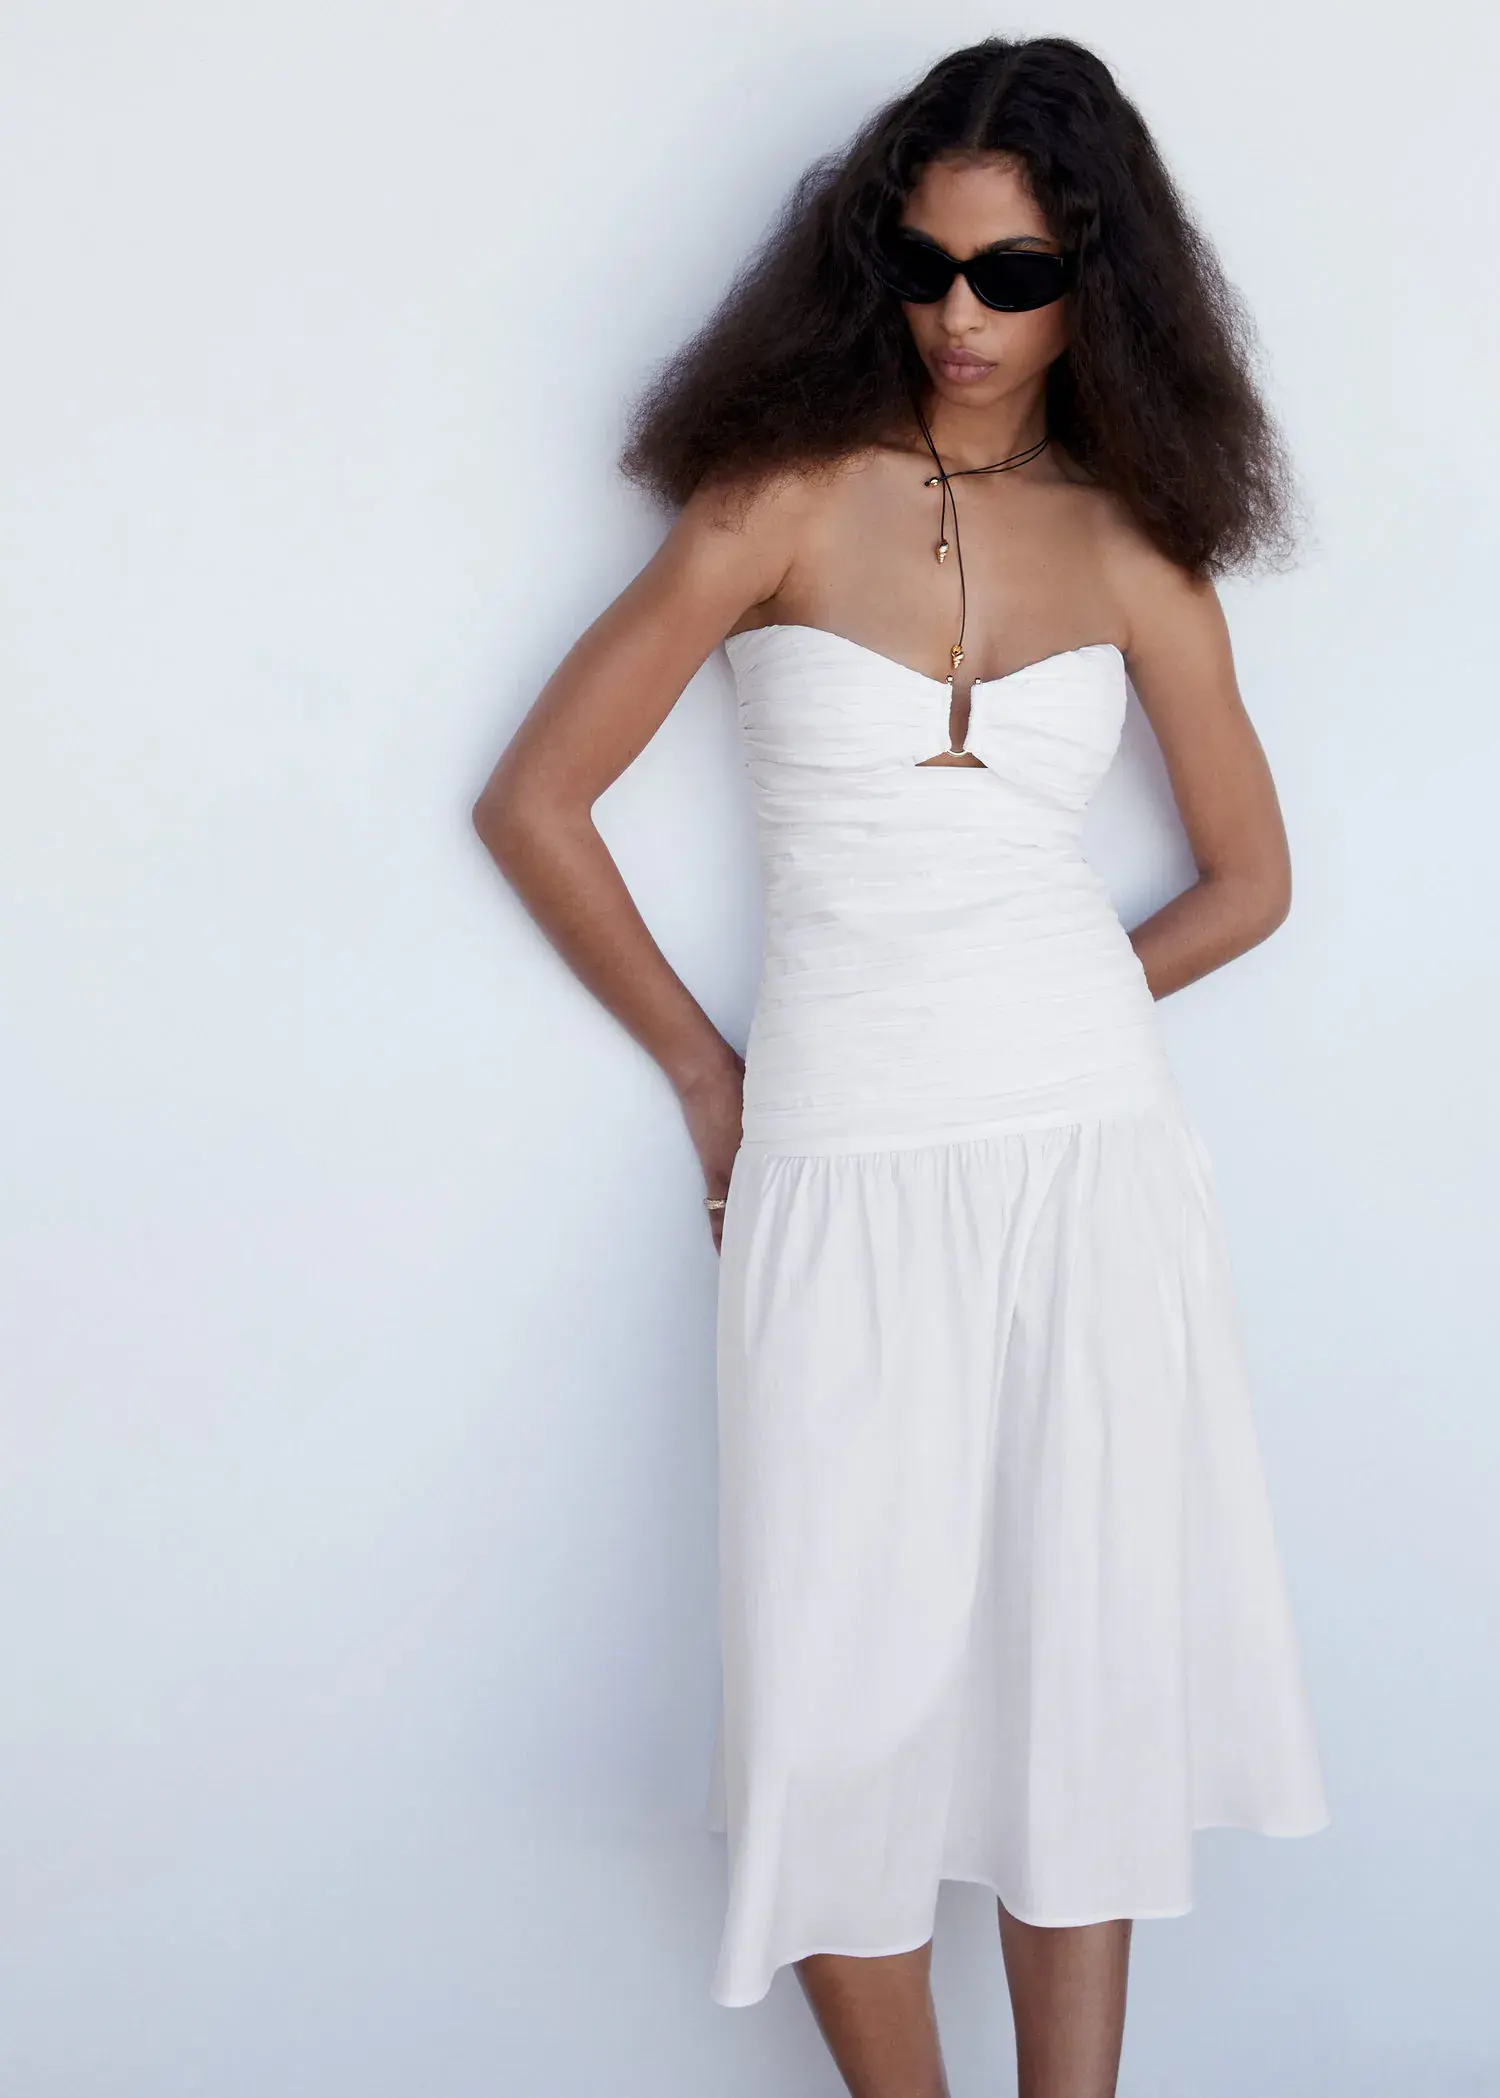 Mango Draped dress with metallic detail. a woman in a long white dress standing next to a wall. 